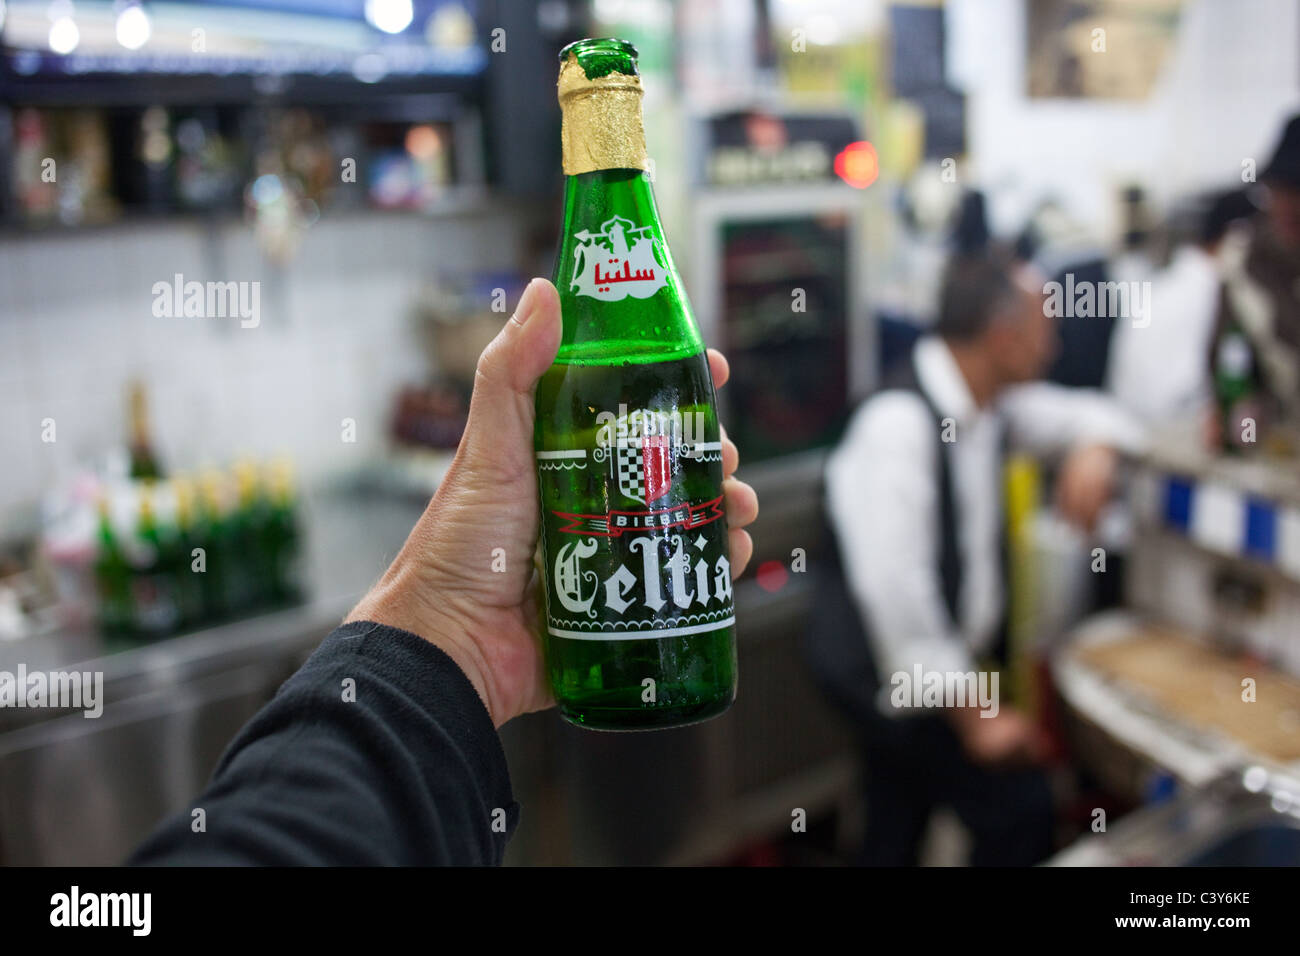 A bottle of a popular Tunisian beer Celtia hold in a hand in a bar in Sfax, Tunisia. Stock Photo